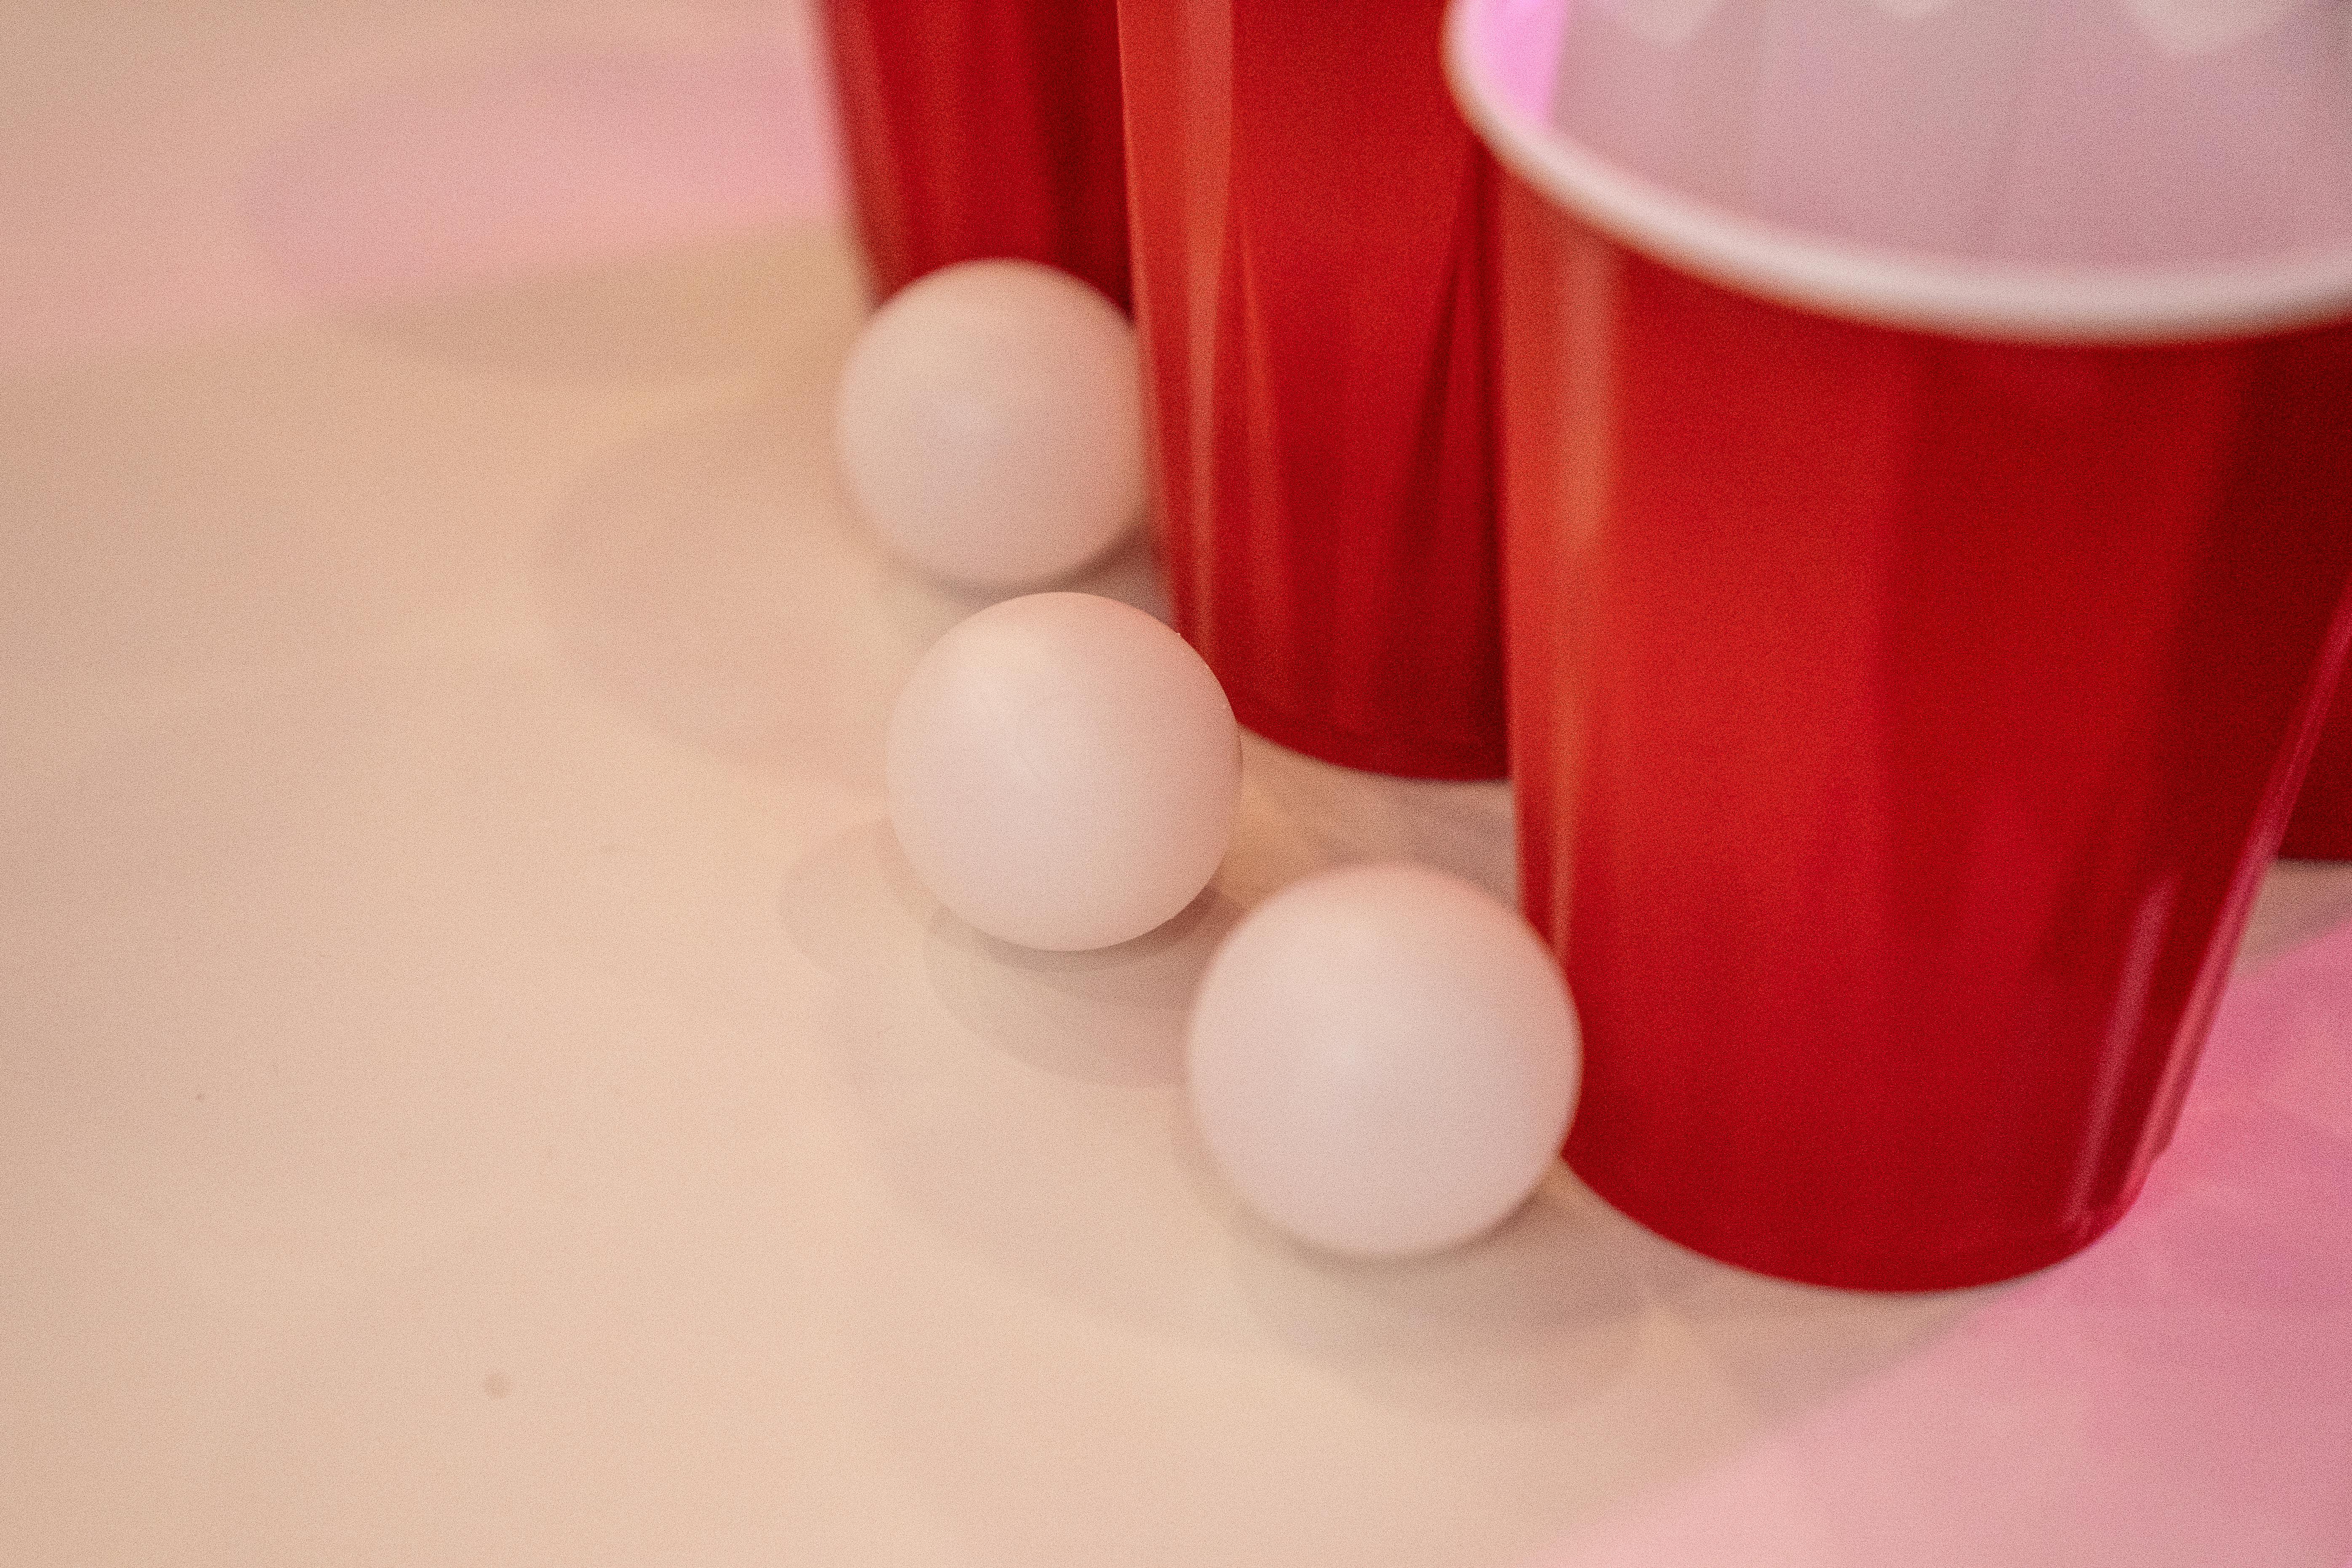 Red Cups Beside Small Balls on a White Surface · Free Stock Photo